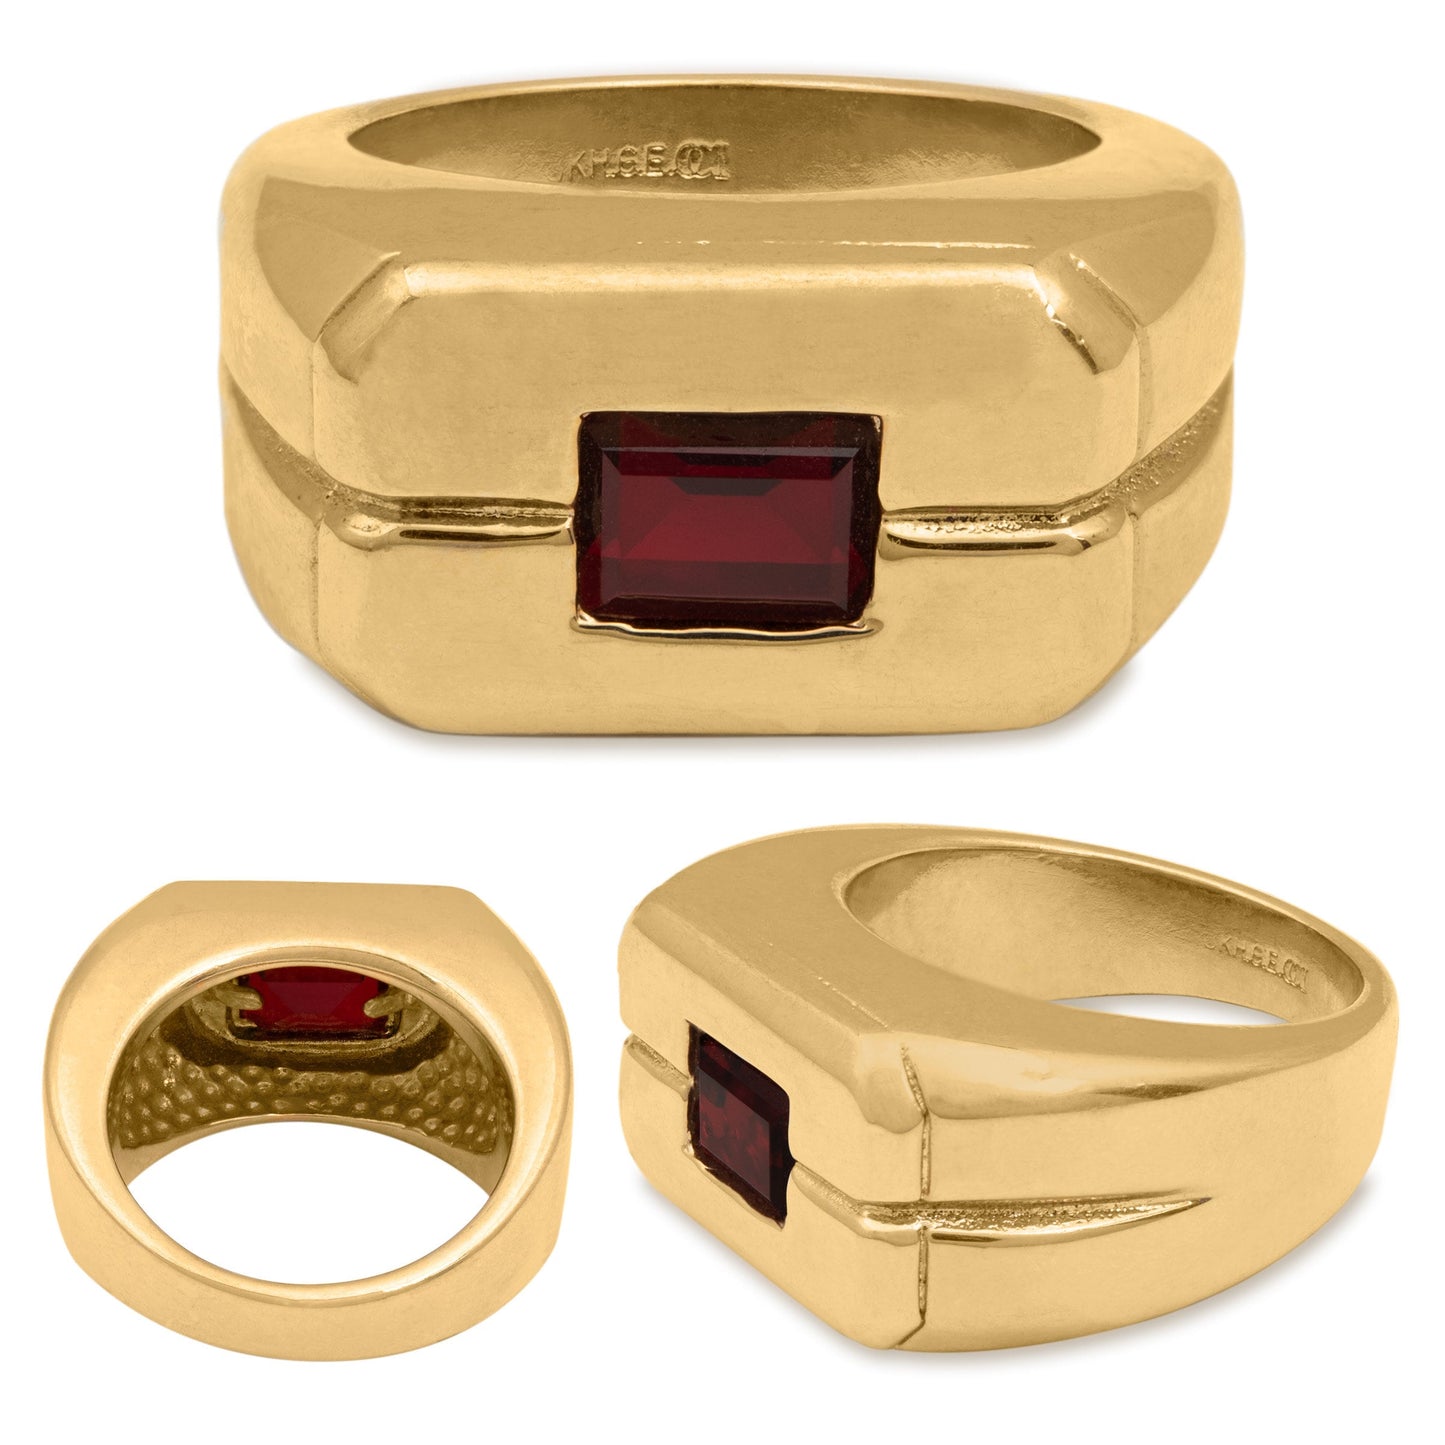 Vintage Ring 1980s Mens Ruby Crystal 18kt Gold Plated Ring Antique Mens Jewelry #R6002-RY - Limited Stock - Never Worn